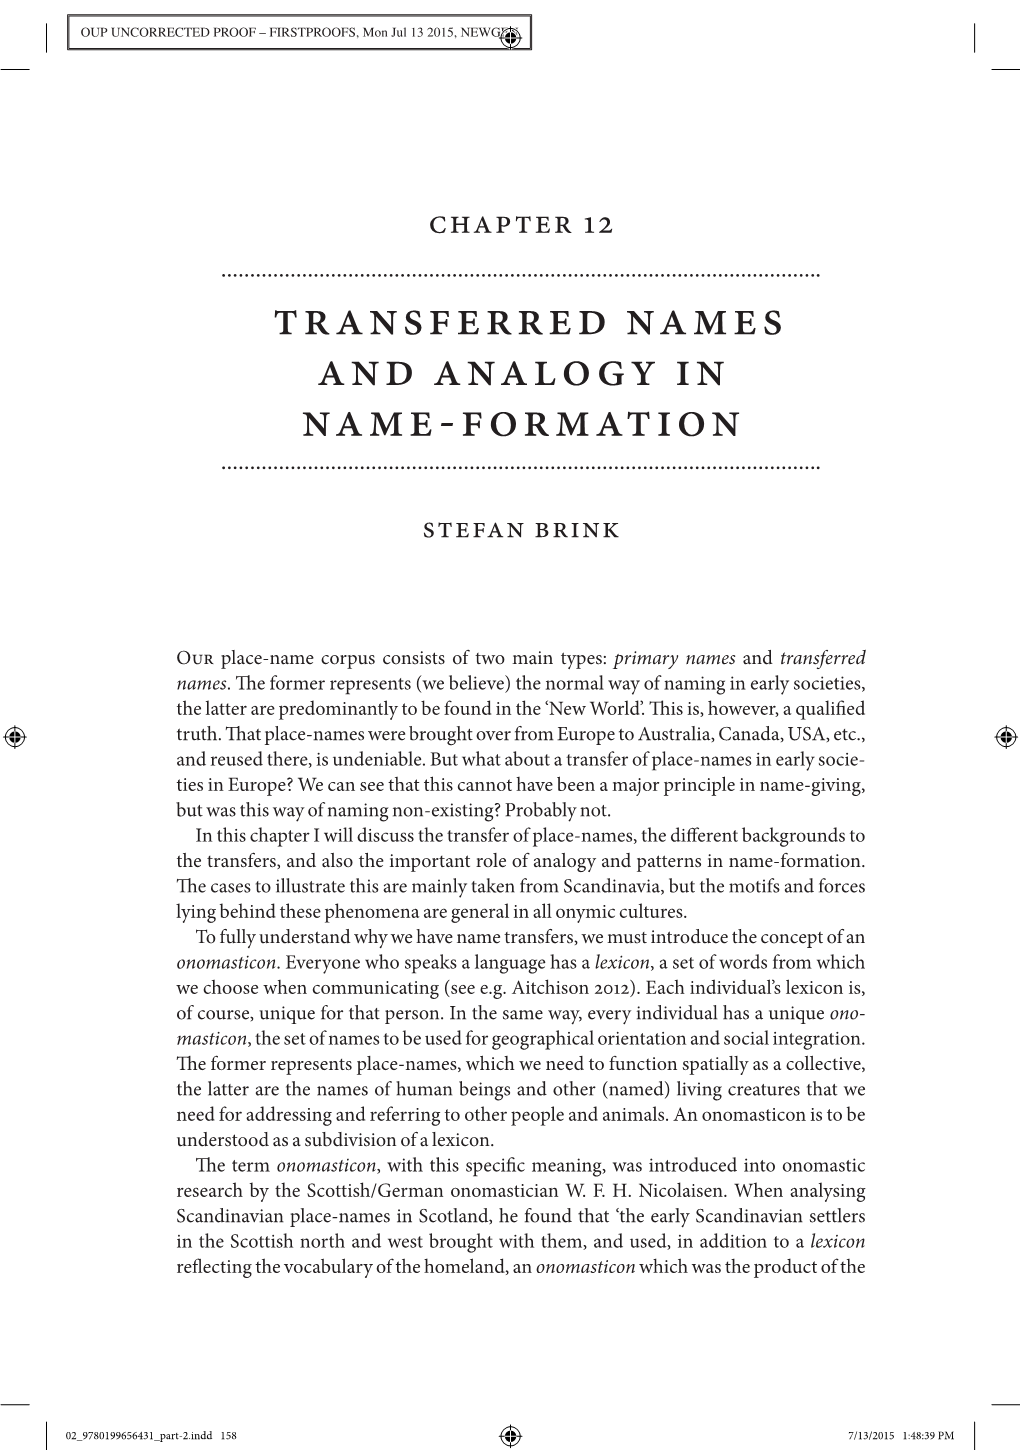 Transferred Names and Analogy in Name-Formation